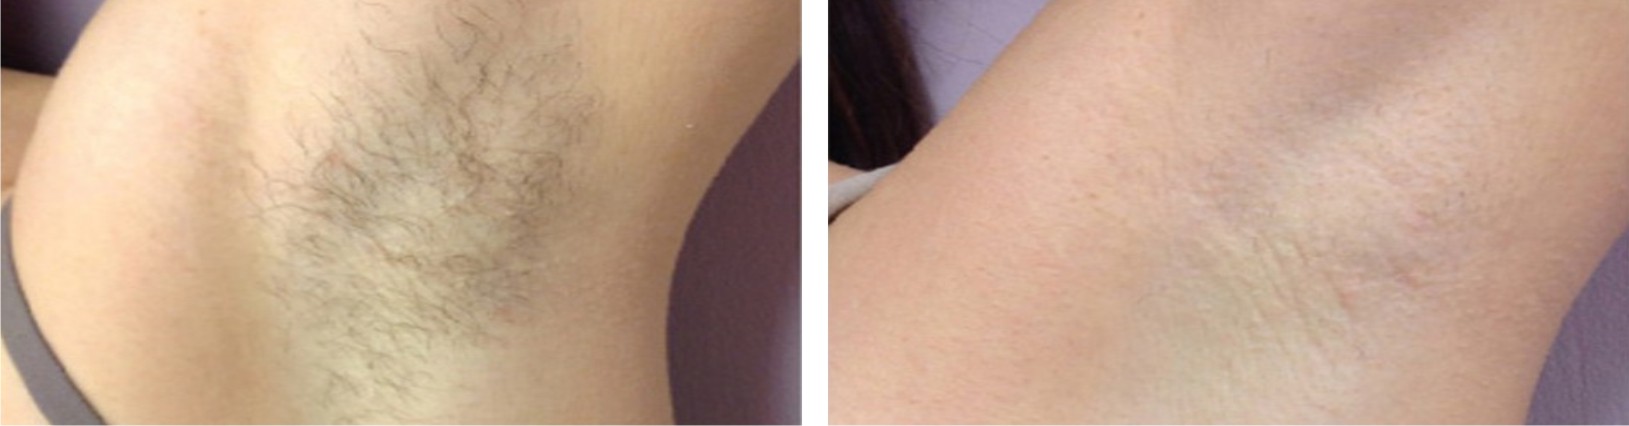 Painless Laser Hair Removal Image Three